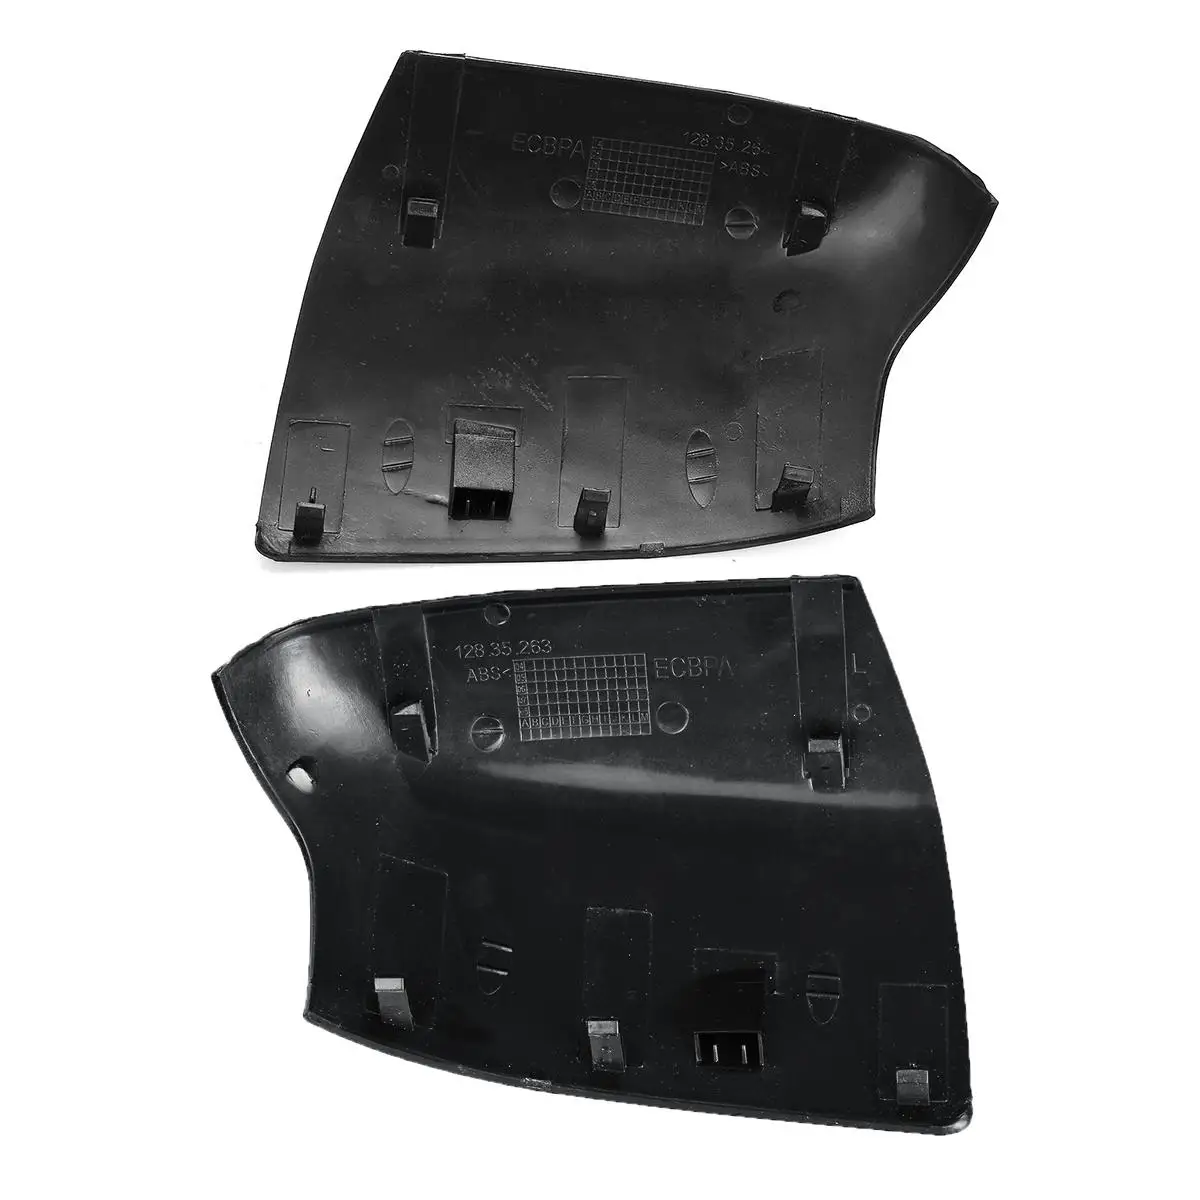 L/R For FORD for FOCUS MK2 2005-2007 ABS BLACK SIDE DOOR WING MIRROR COVER CAP CASING TRIM DRIVERS ST CC